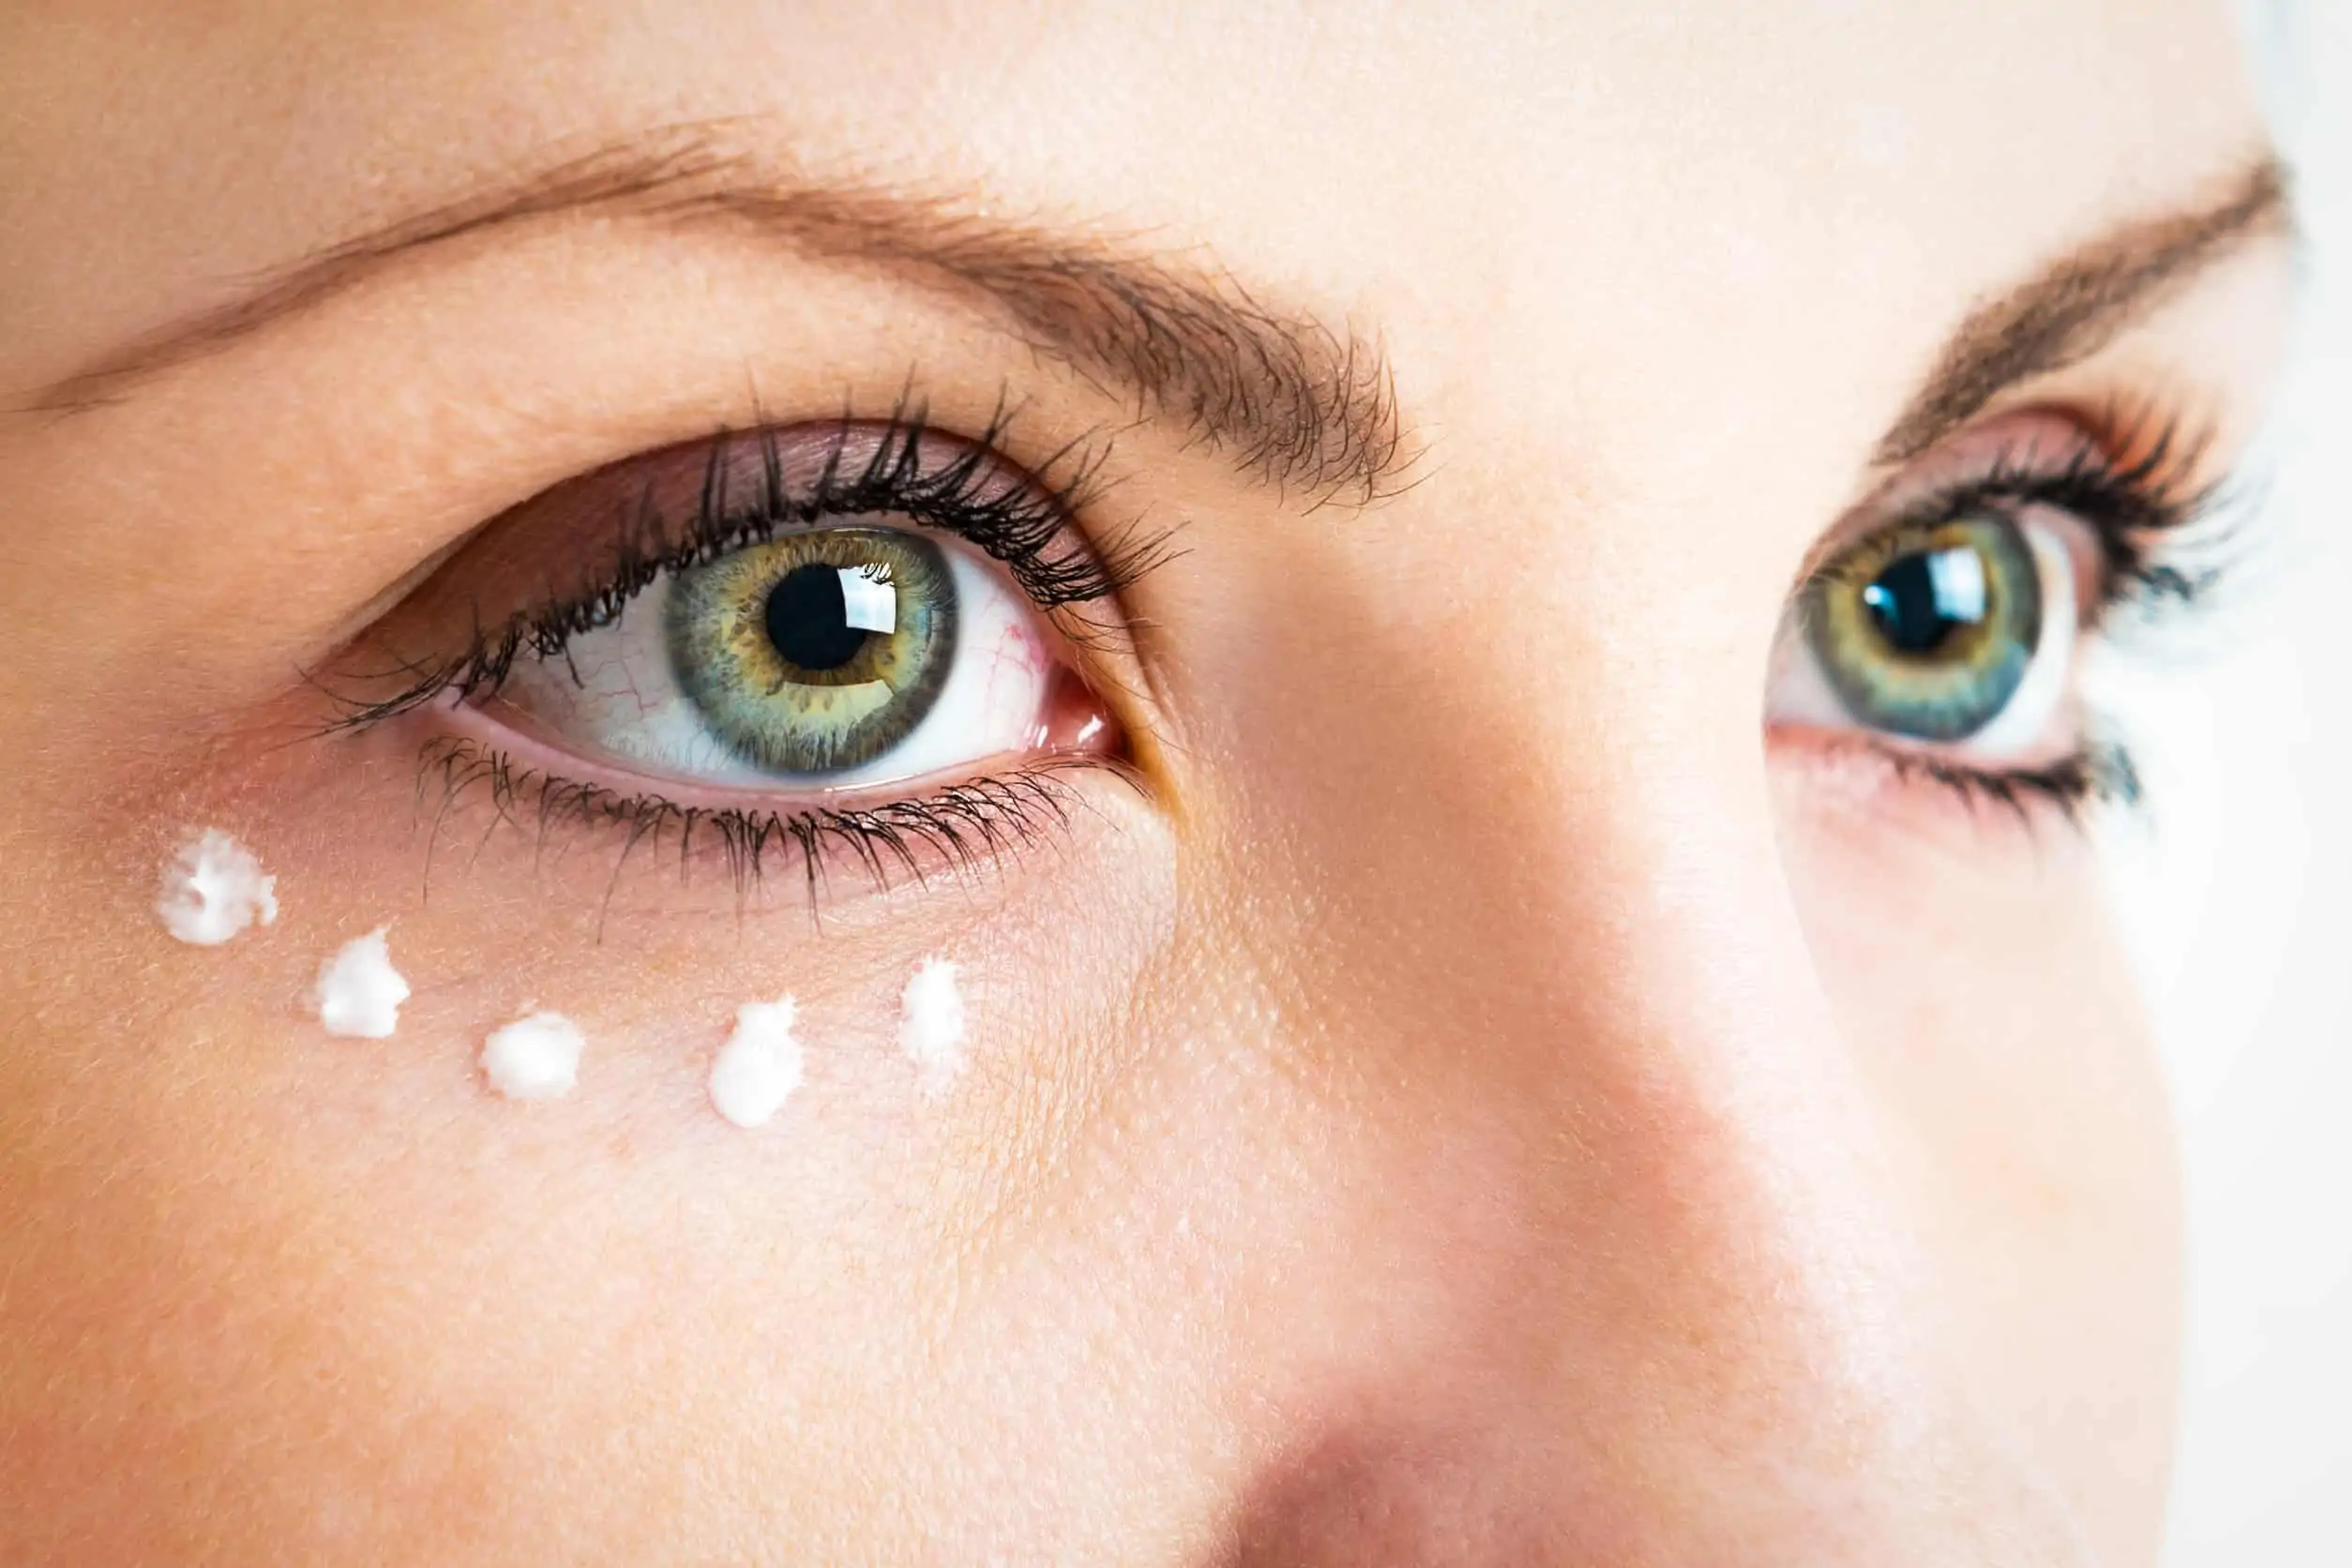 Woman with green eyes: five dots of eye cream under right eye